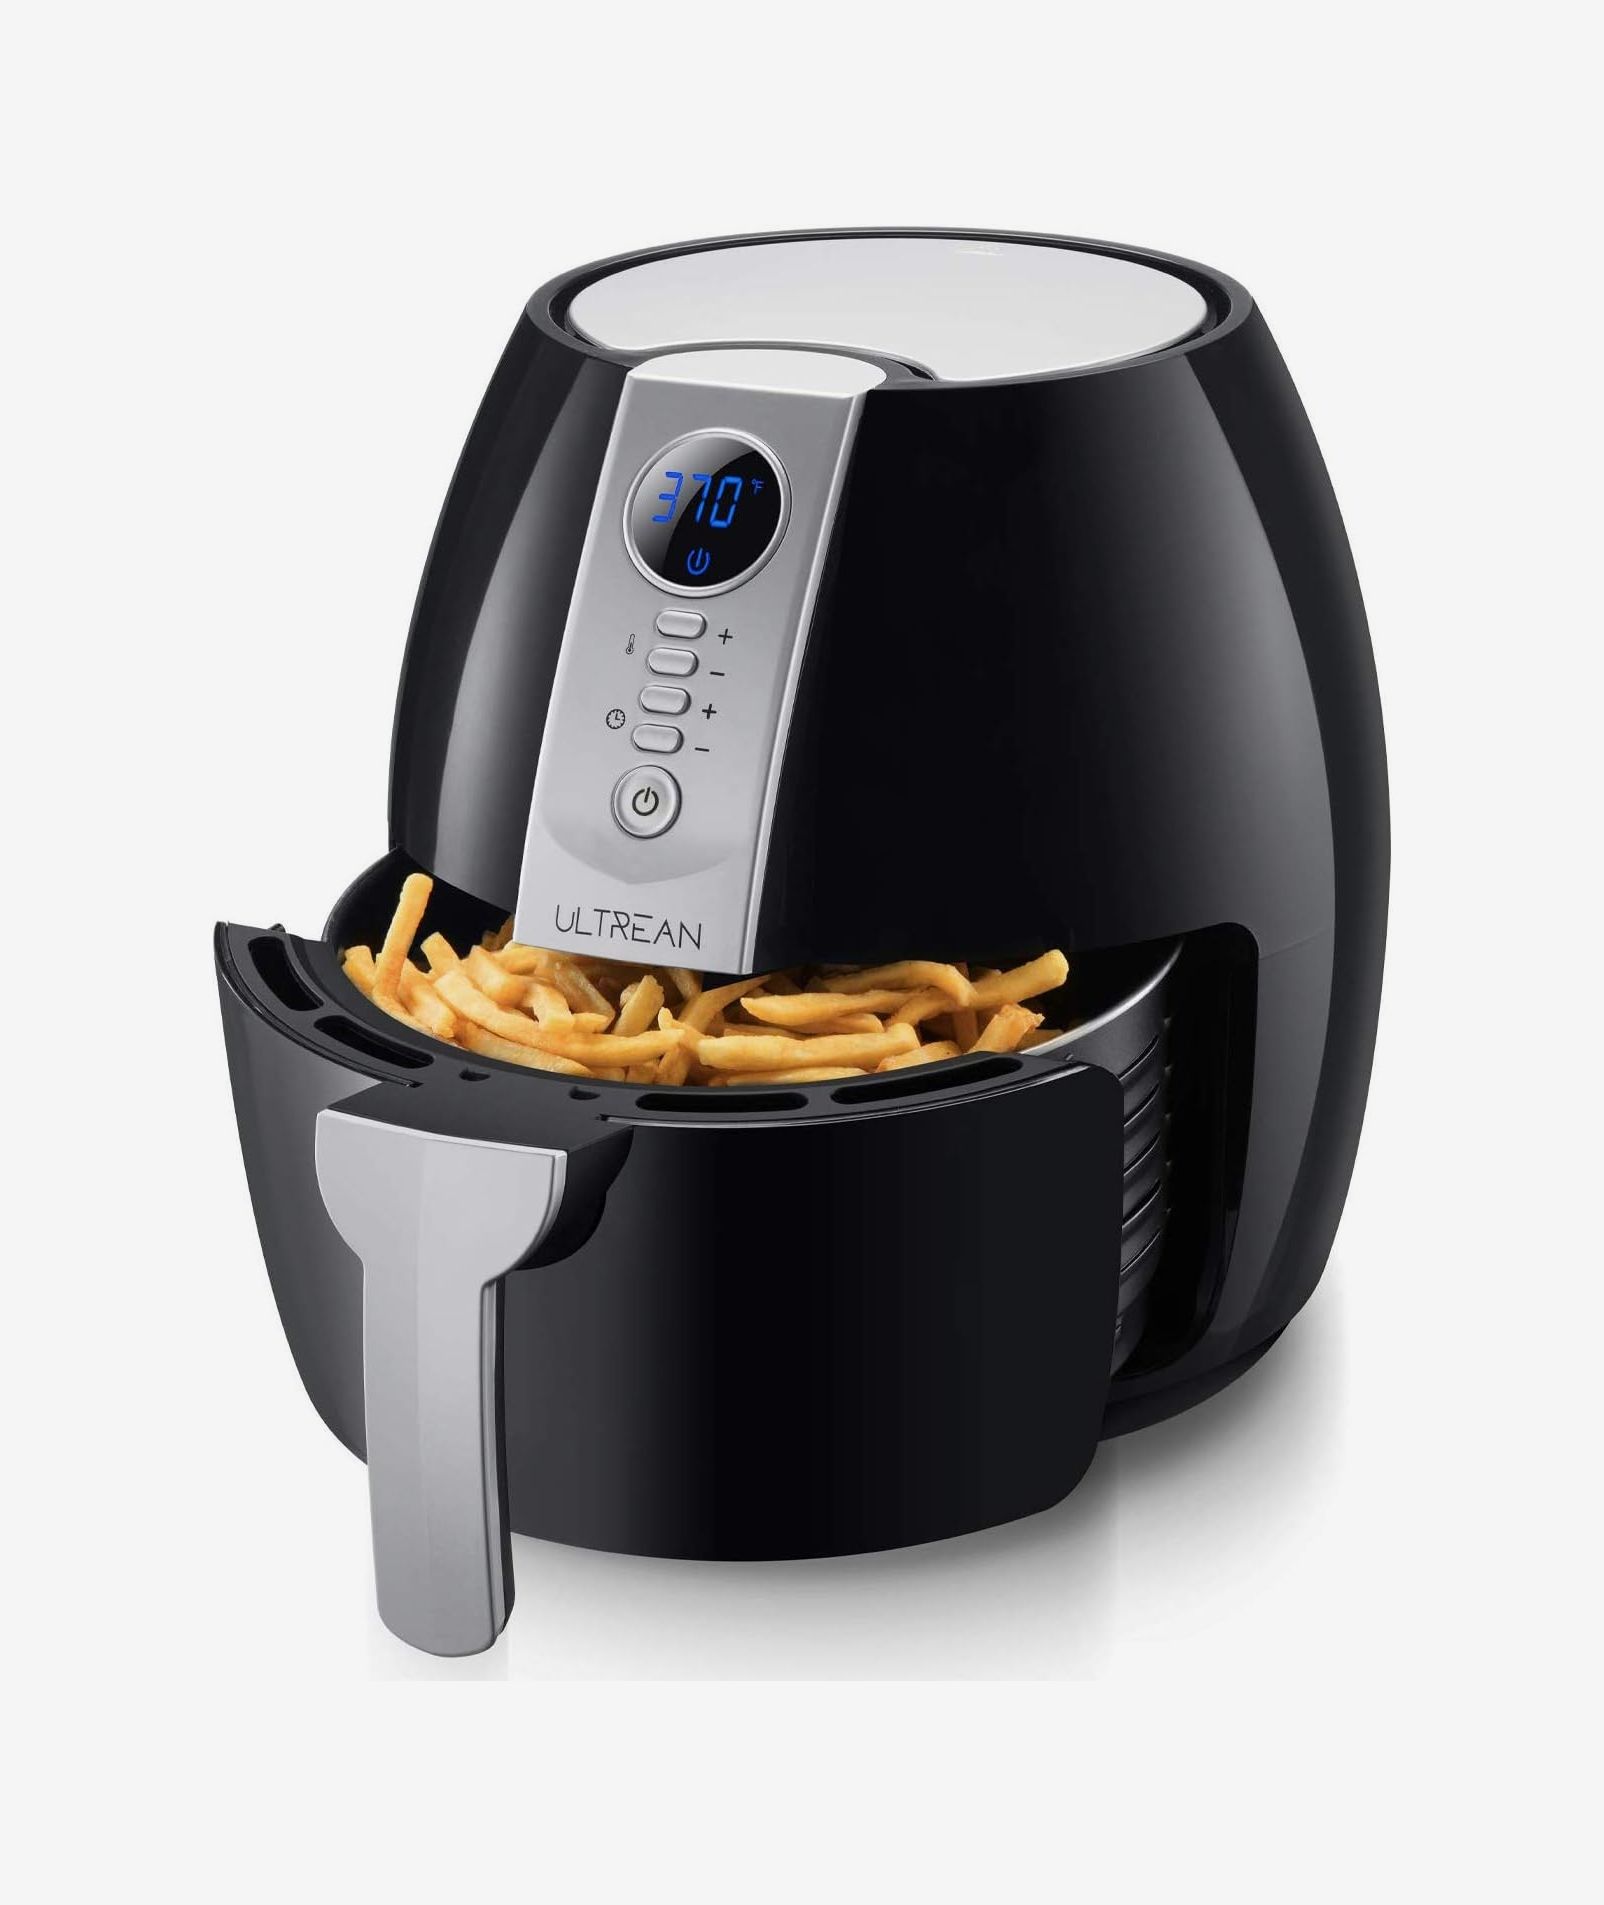 14 Ways to Use Your Air Fryer You Probably Didn't Think Of